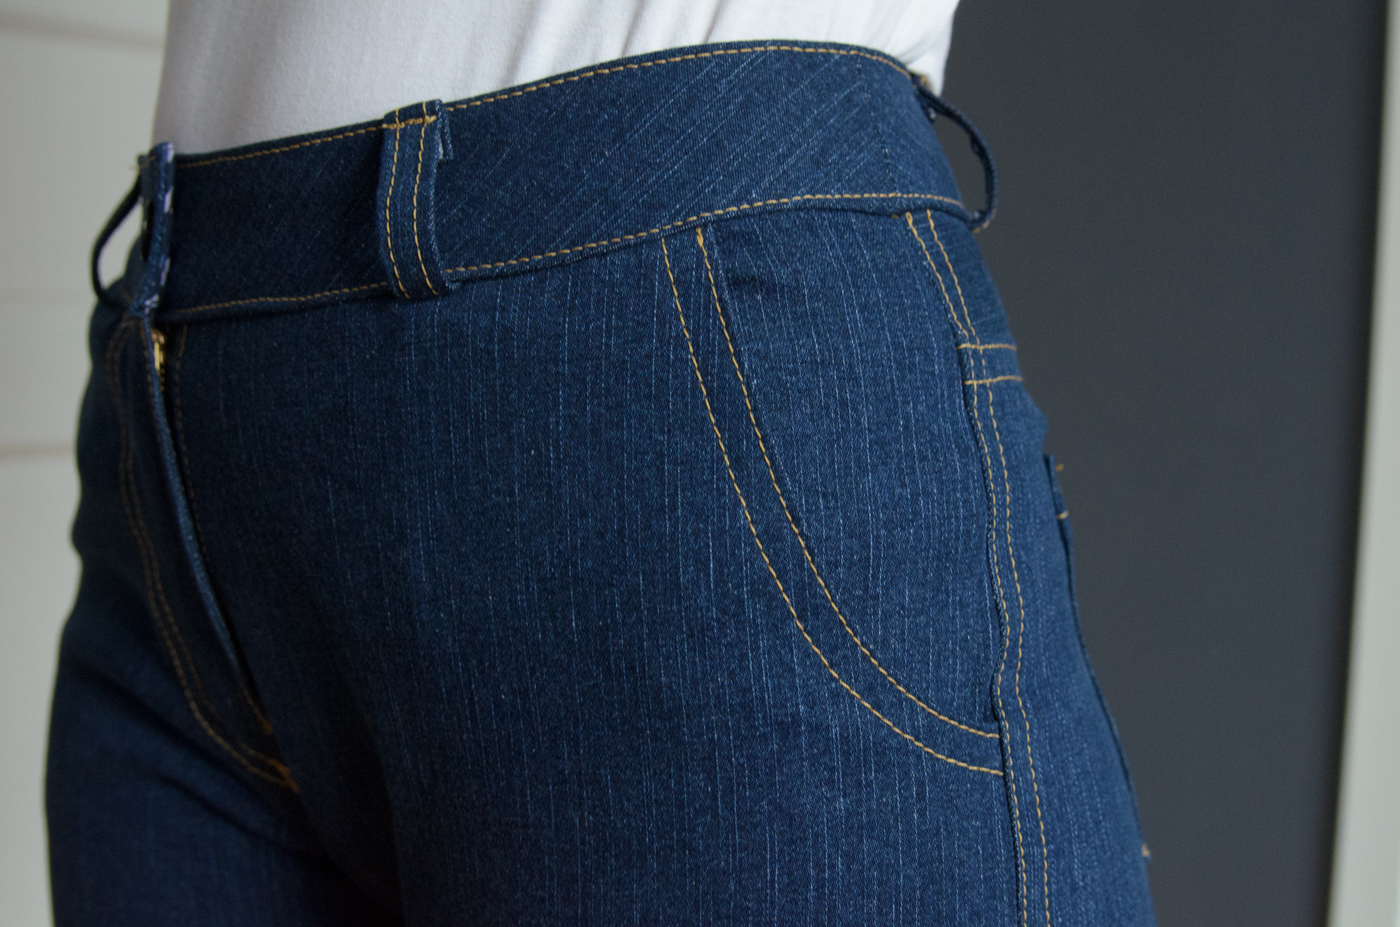 Catharsis by Cia: I finally made jeans!